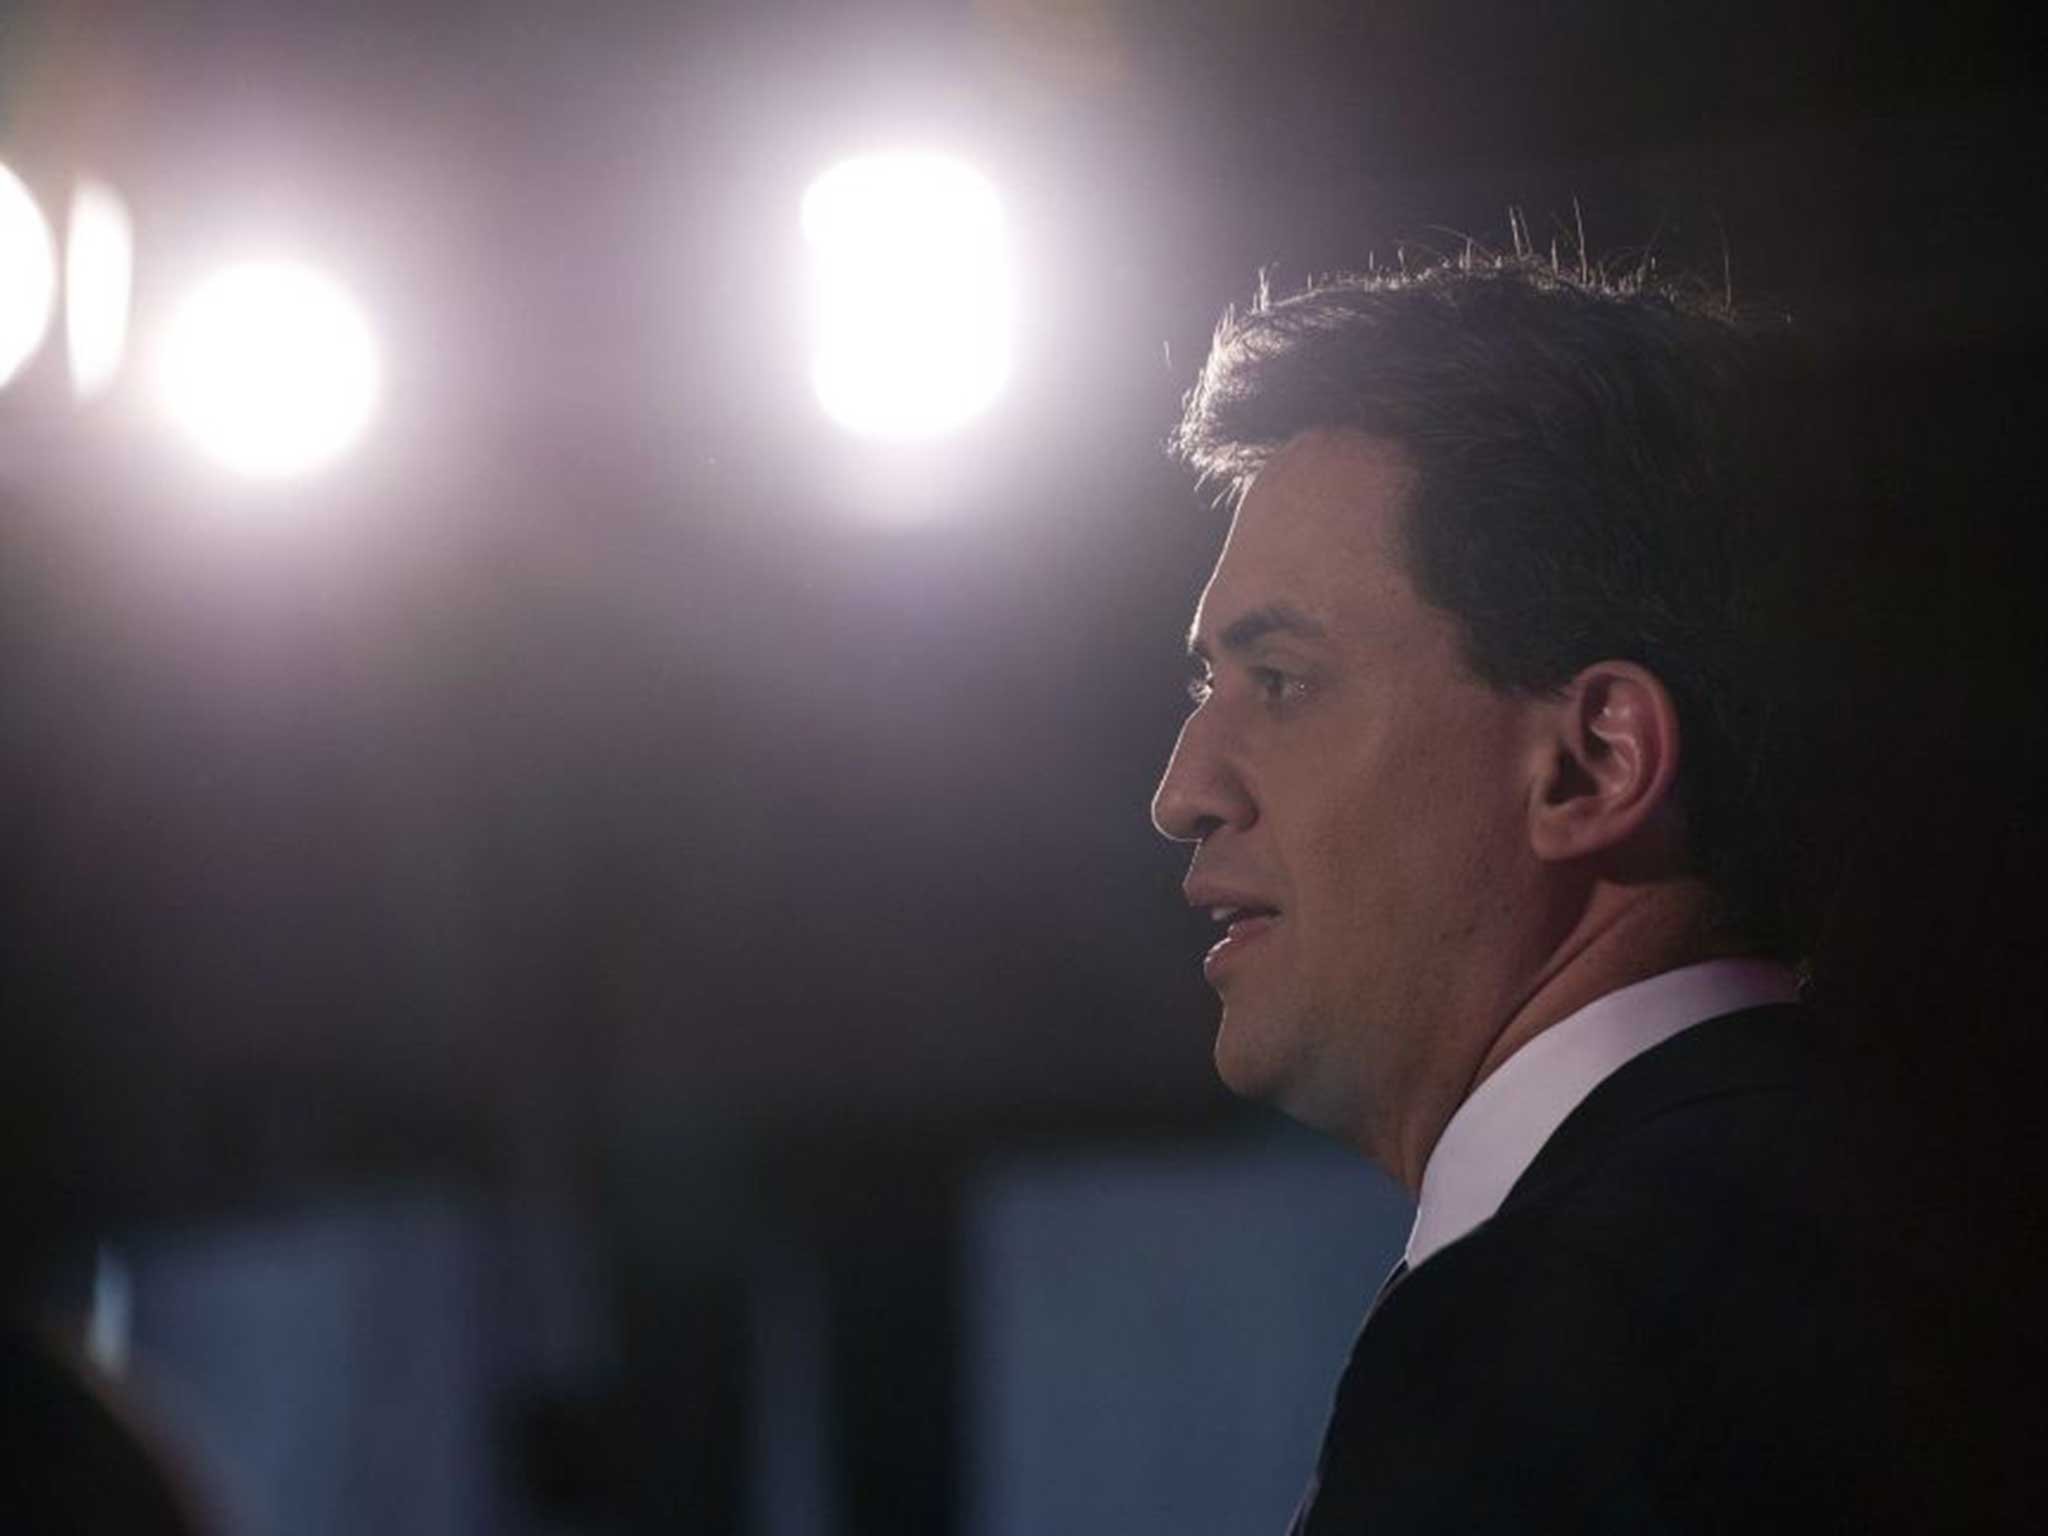 Mr Miliband's performance at the debate was watched by millions - but has it changed any minds?